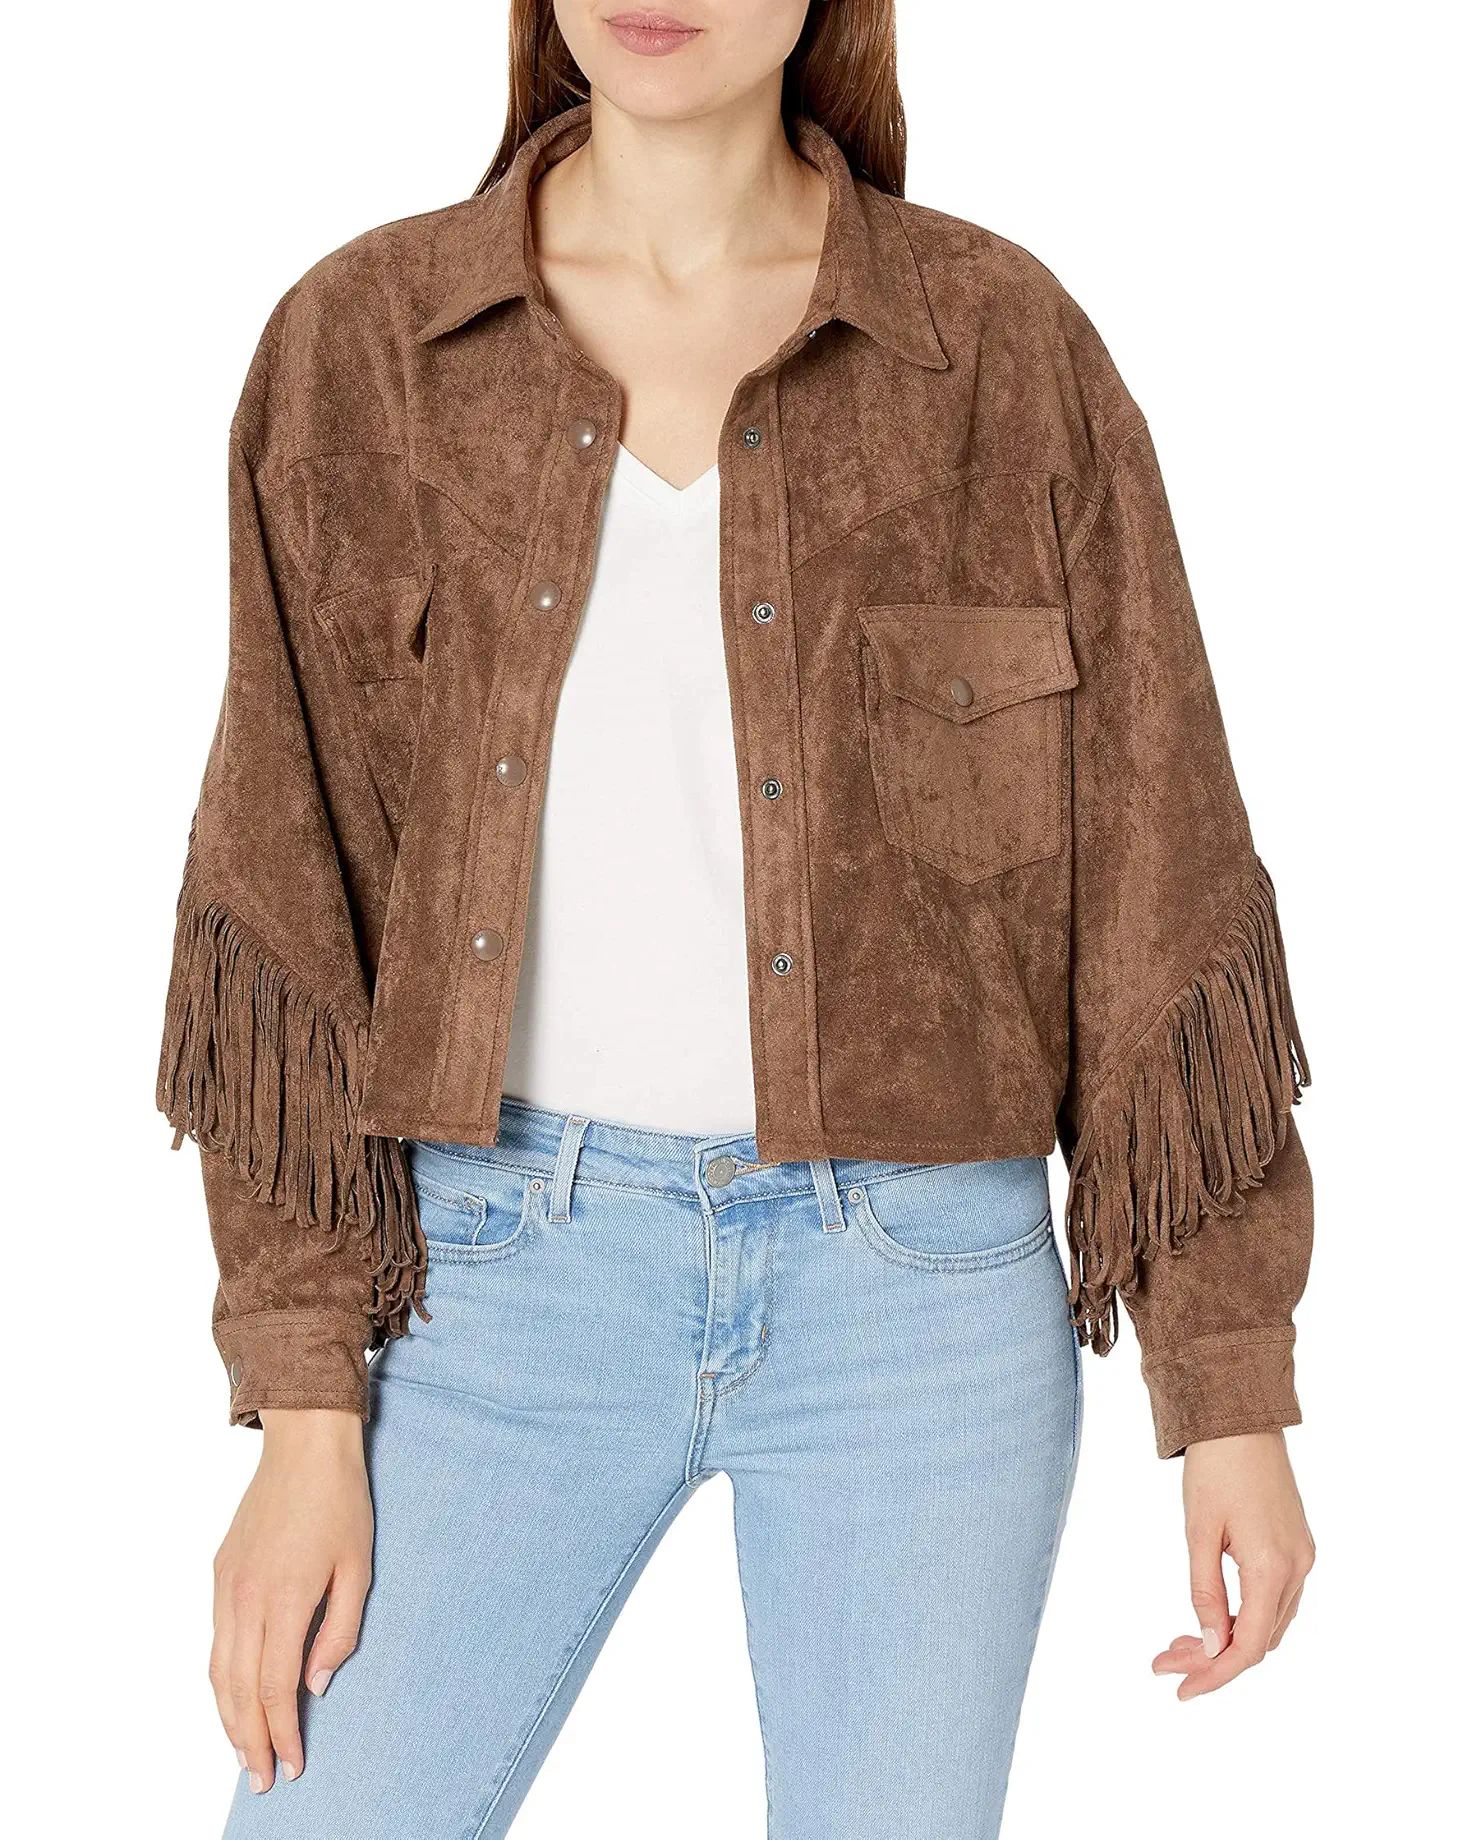 Faux Suede Fringe Shirt Jacket in Hot Cocoa | Zappos